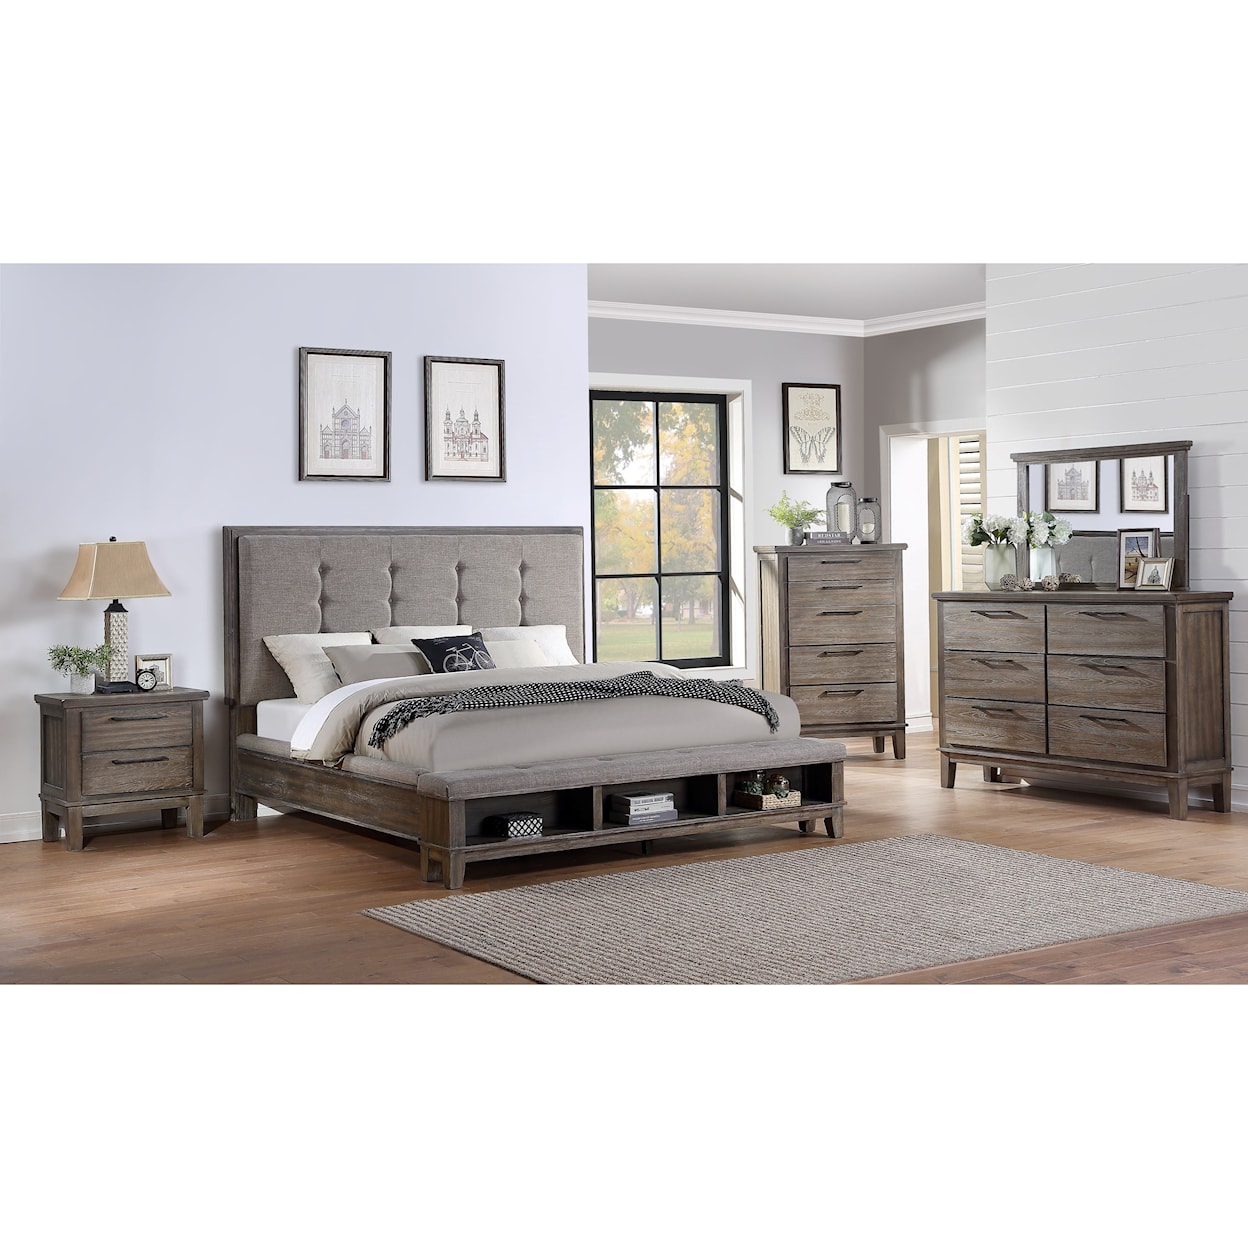 New Classic Cagney 6PC King Bedroom